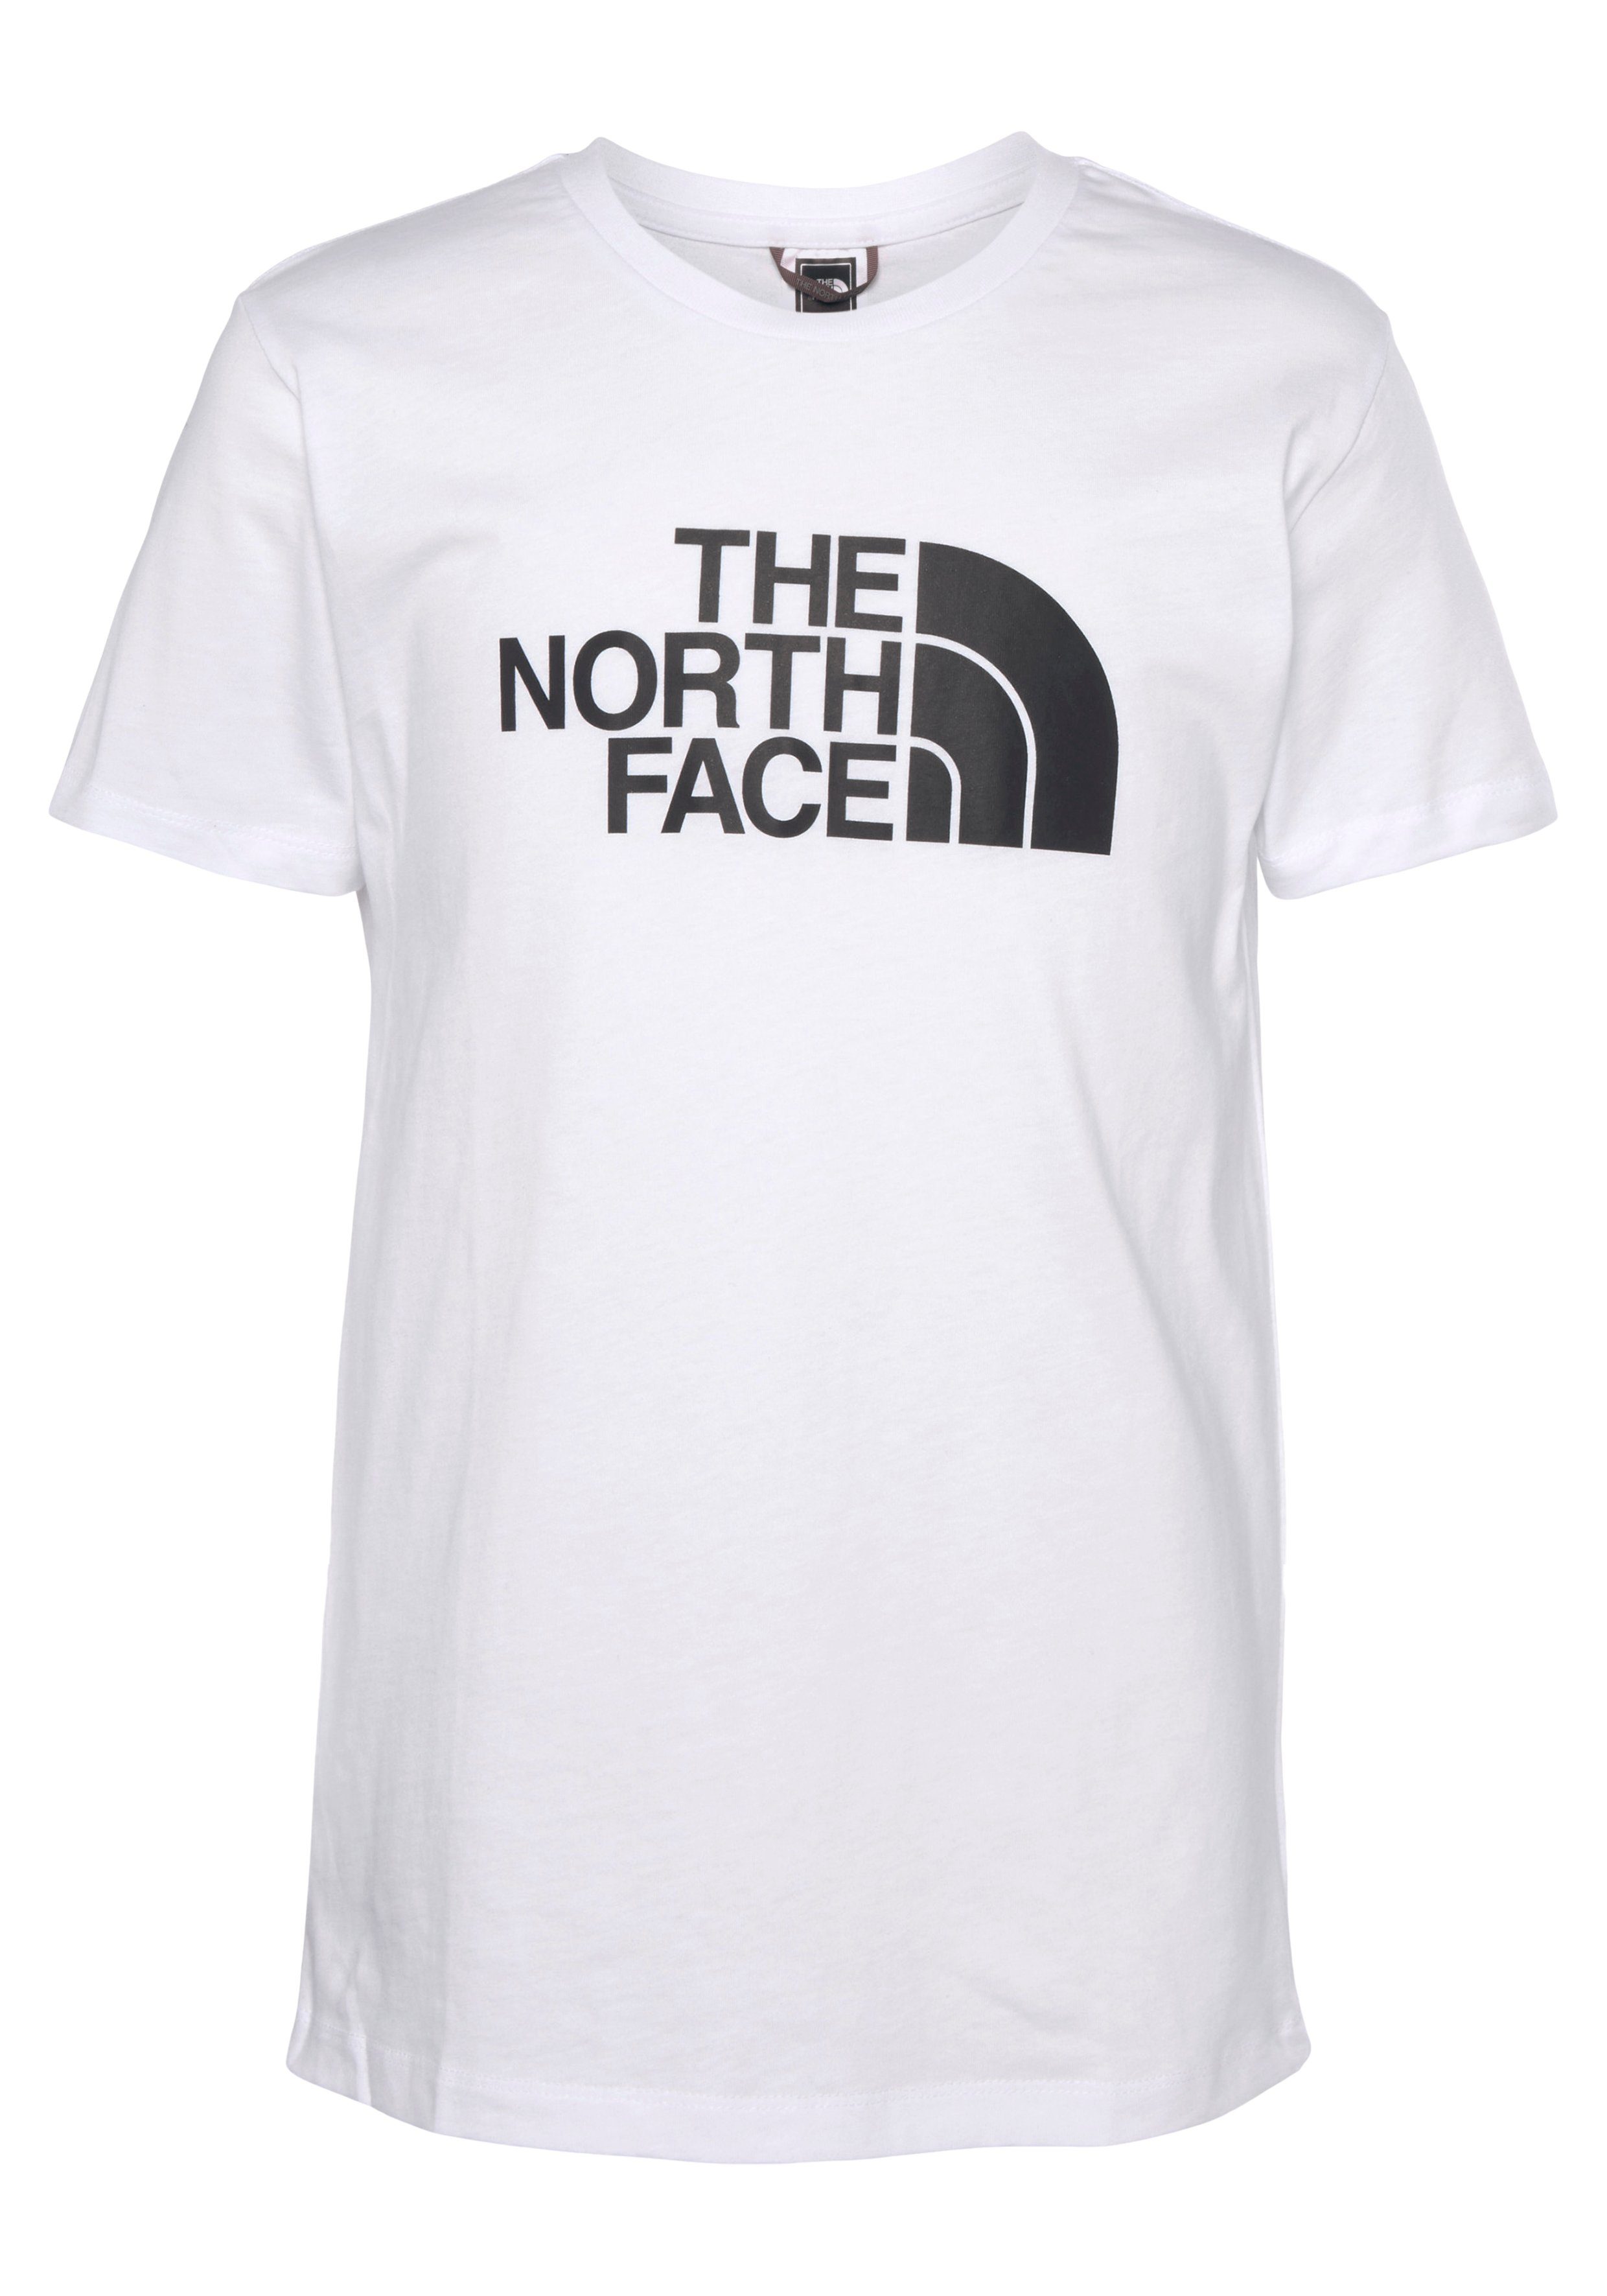 T-Shirt North Face Kinder für The white TEE - EASY